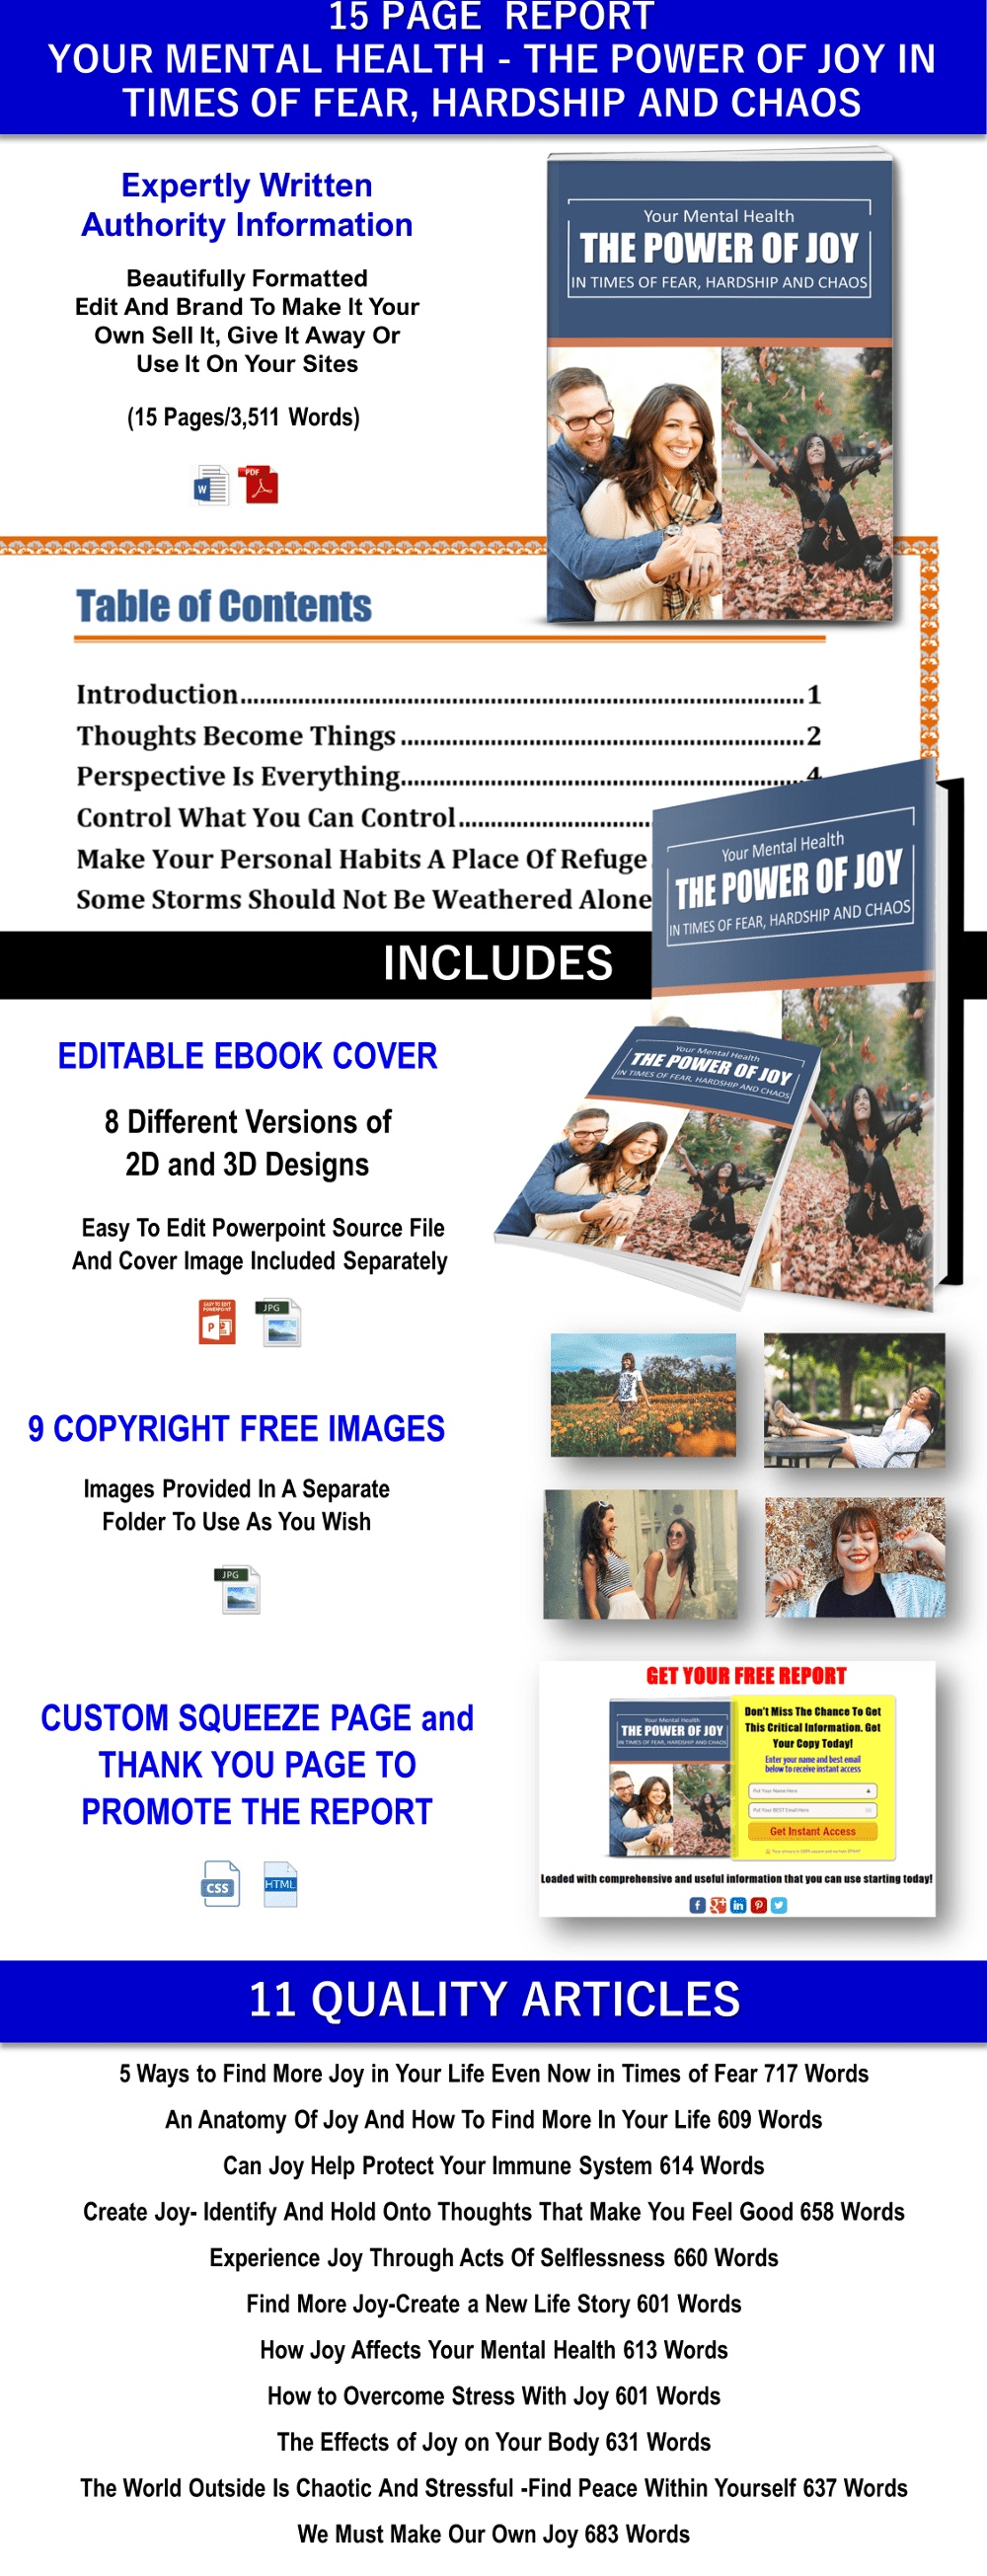 Elevate Your Mood: Get Through Difficult Times Giant Content with PLR Rights